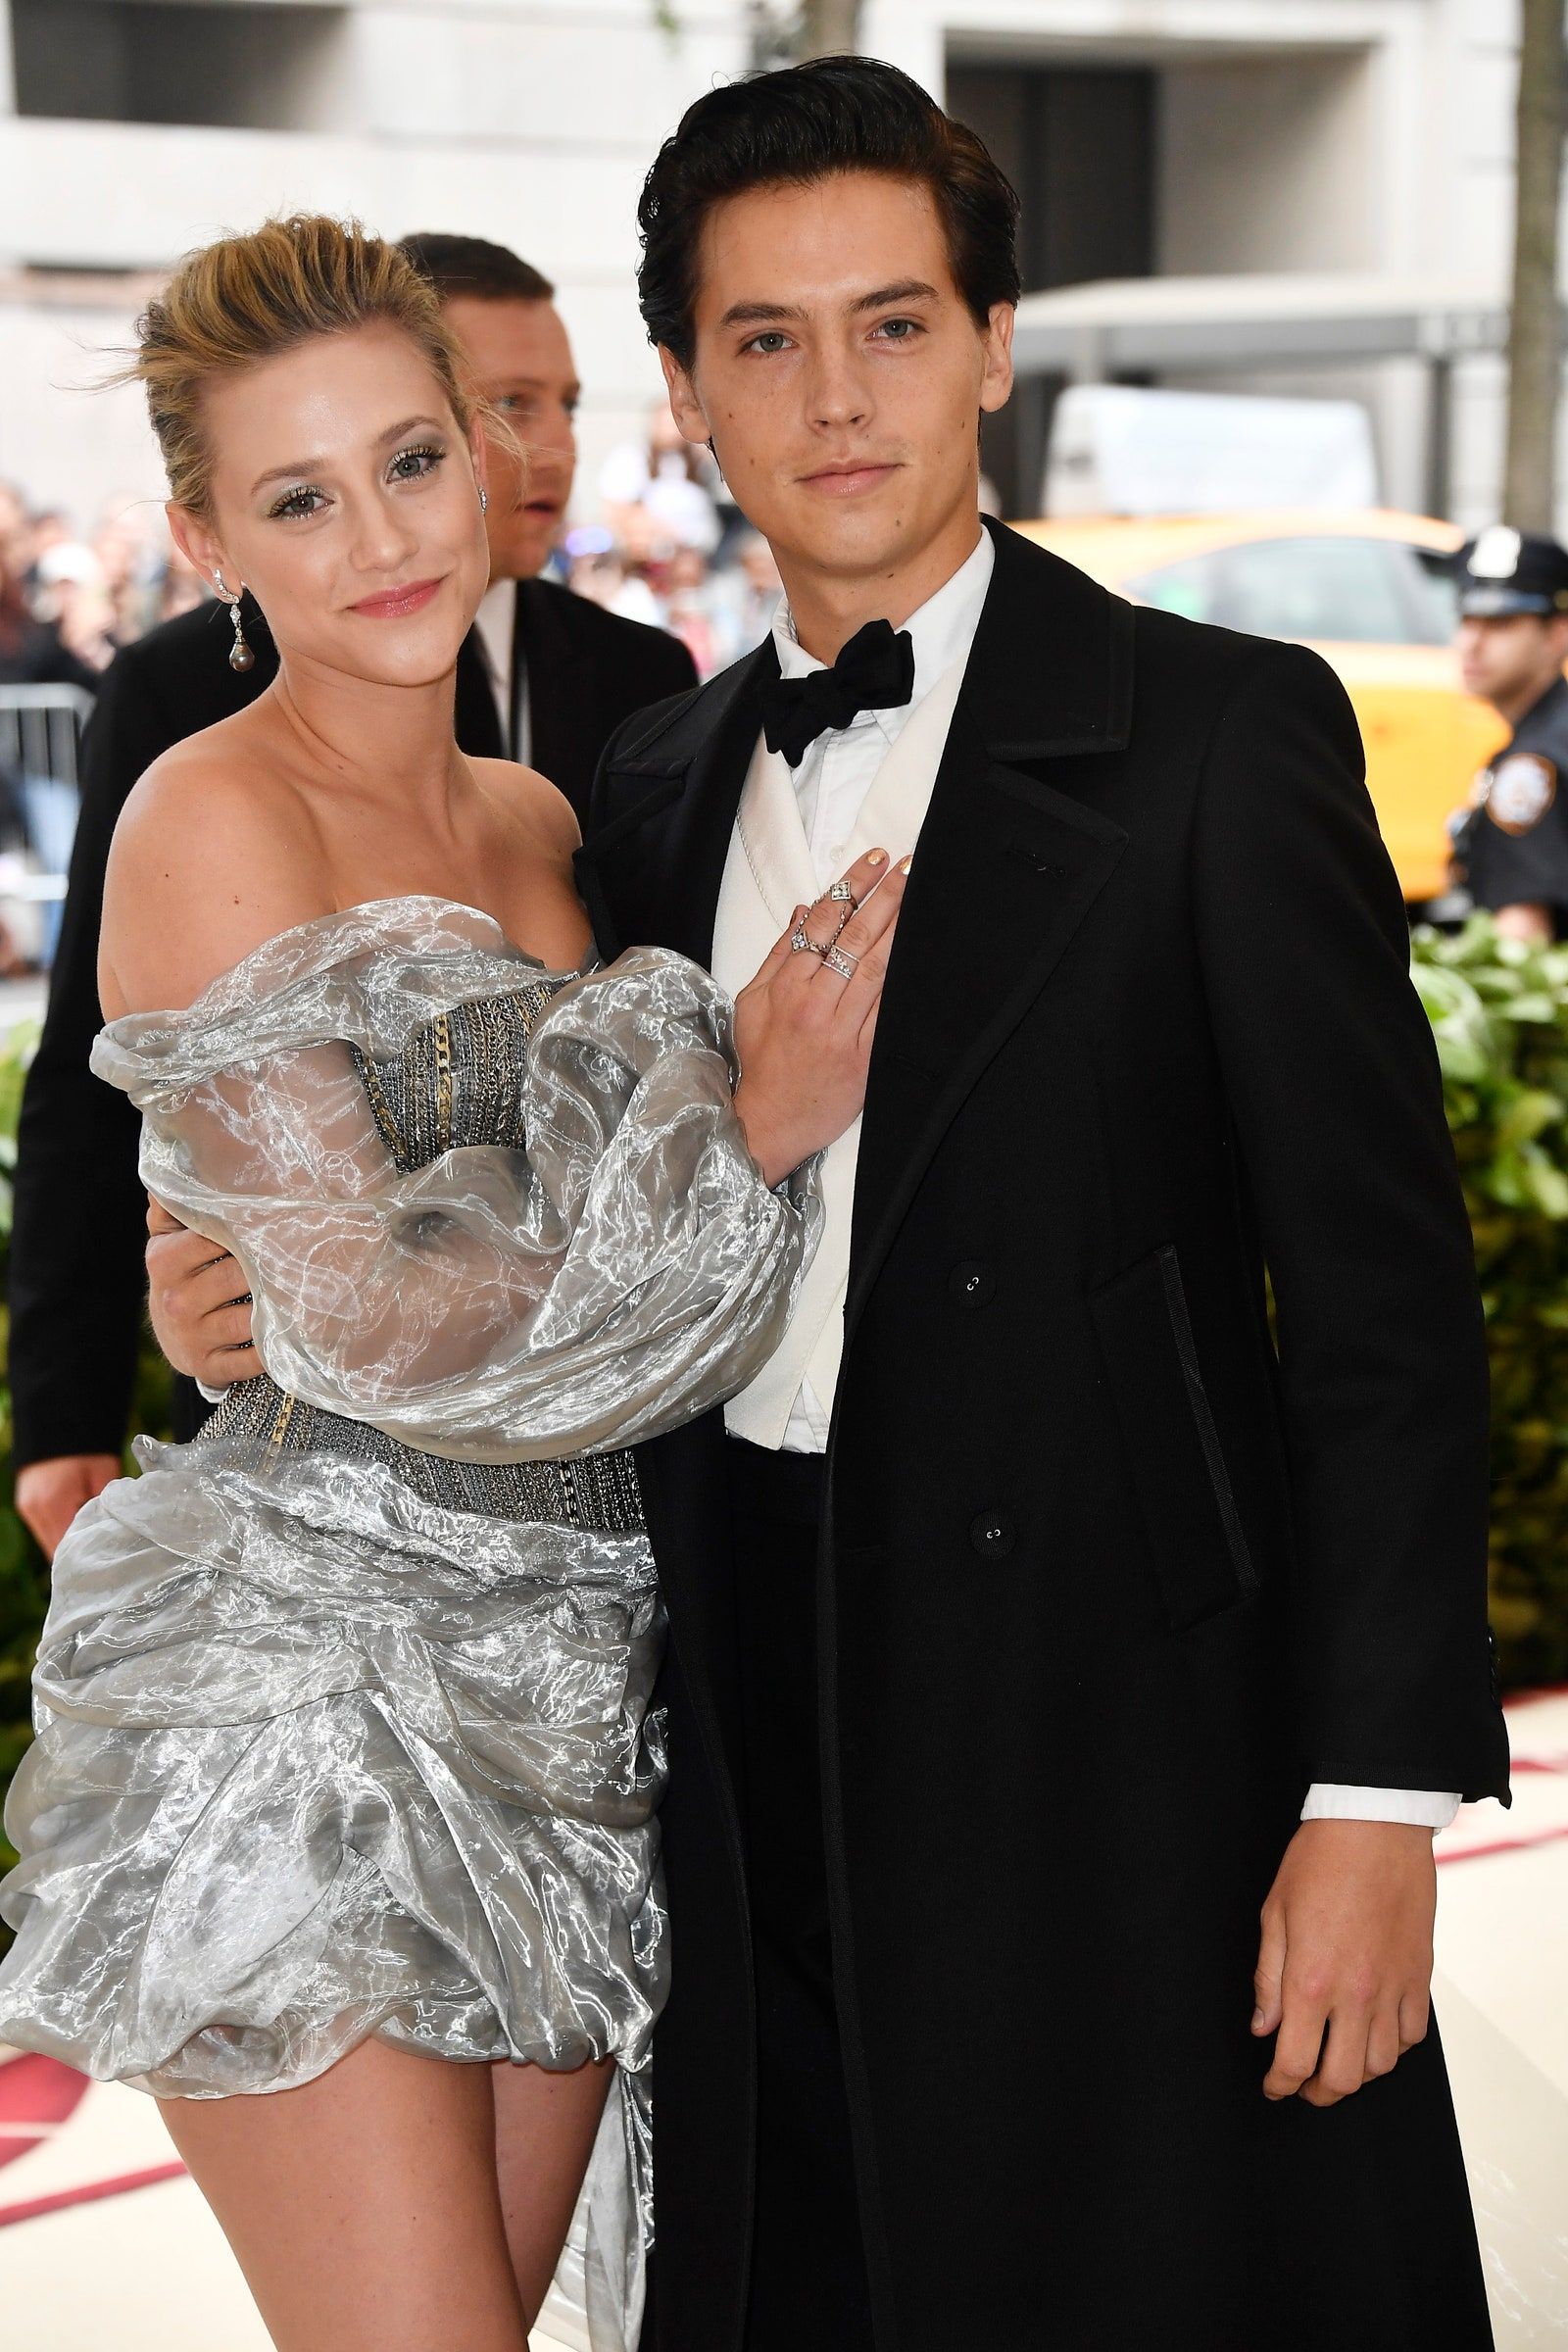 Lili Reinhart and Cole Sprouse's Relationship: A Complete Timeline